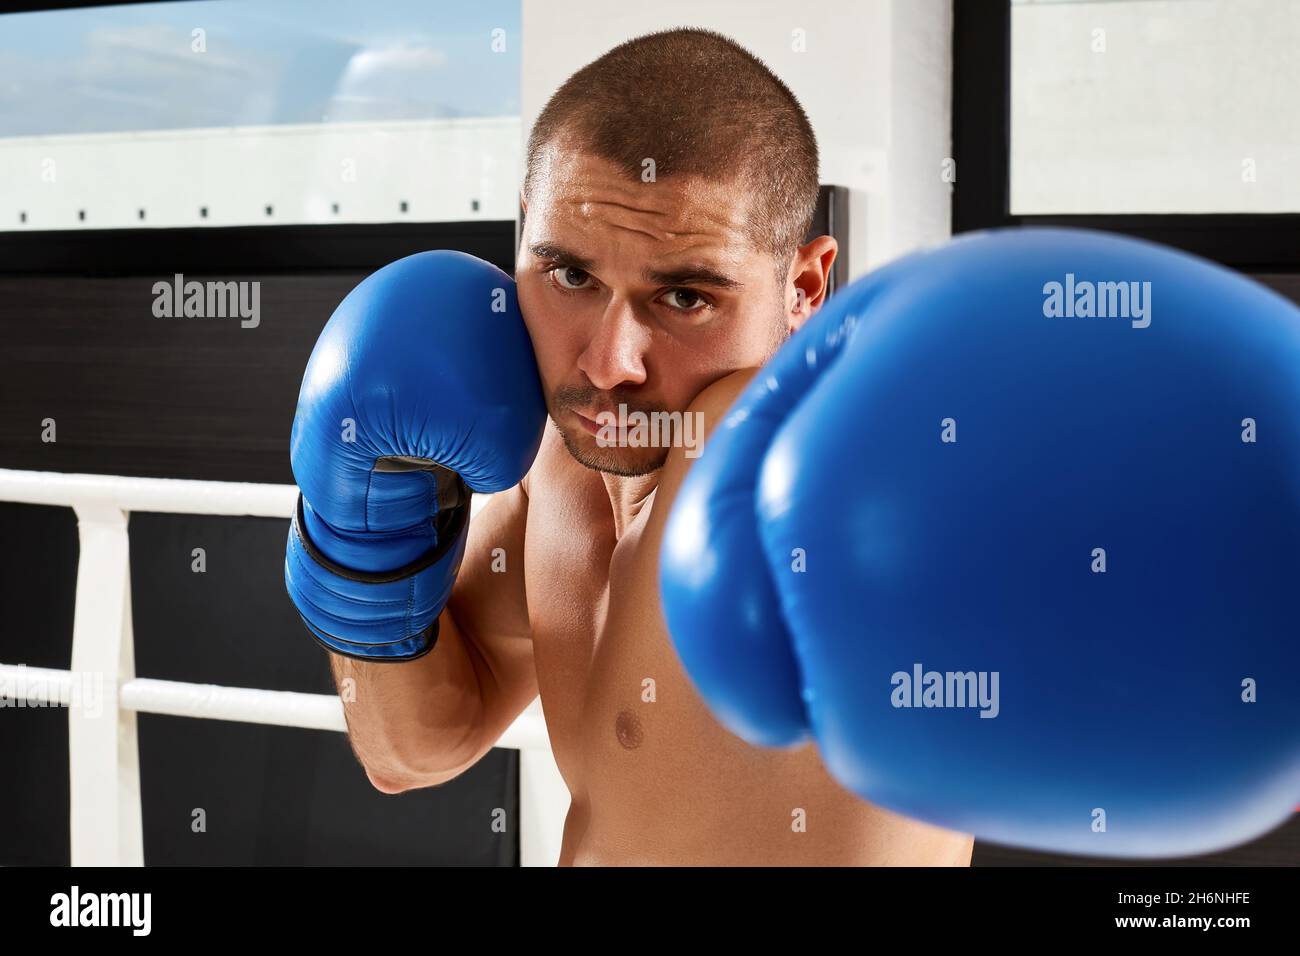 Boxer in blue gloves Stock Photo